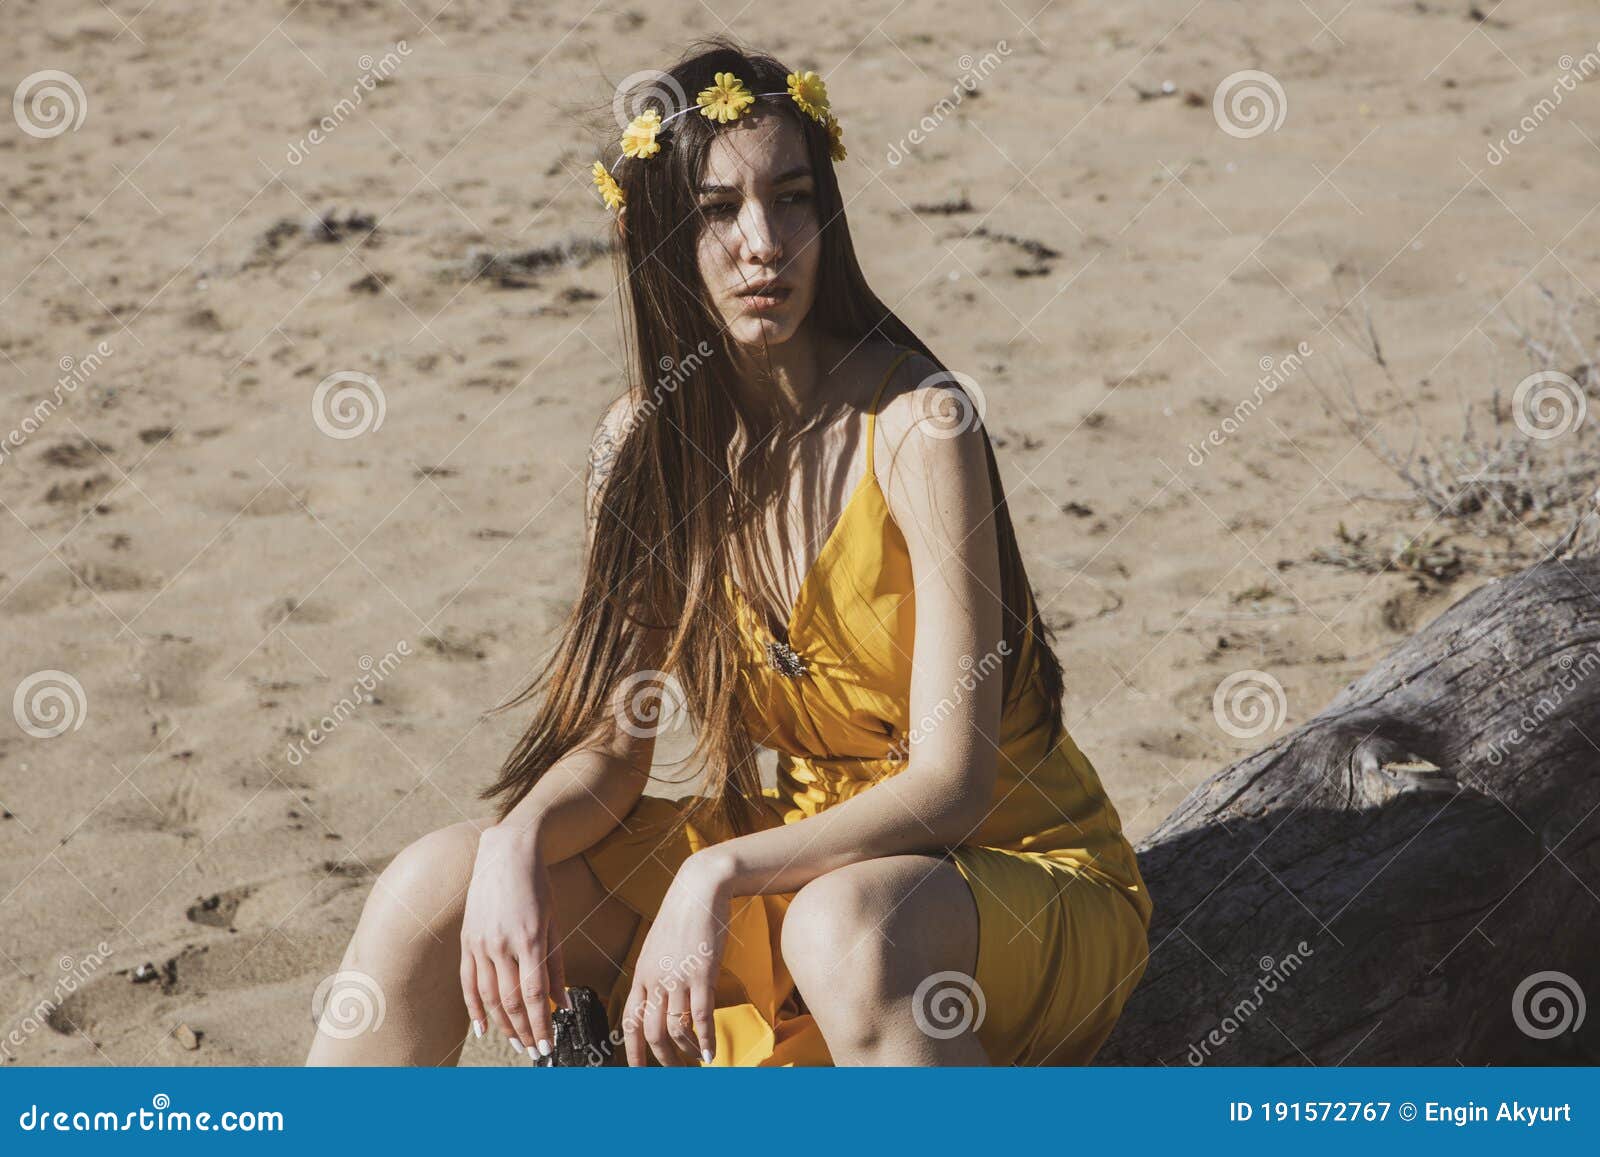 Girl In The Yellow Dress Stock Image Image Of Dress 191572767